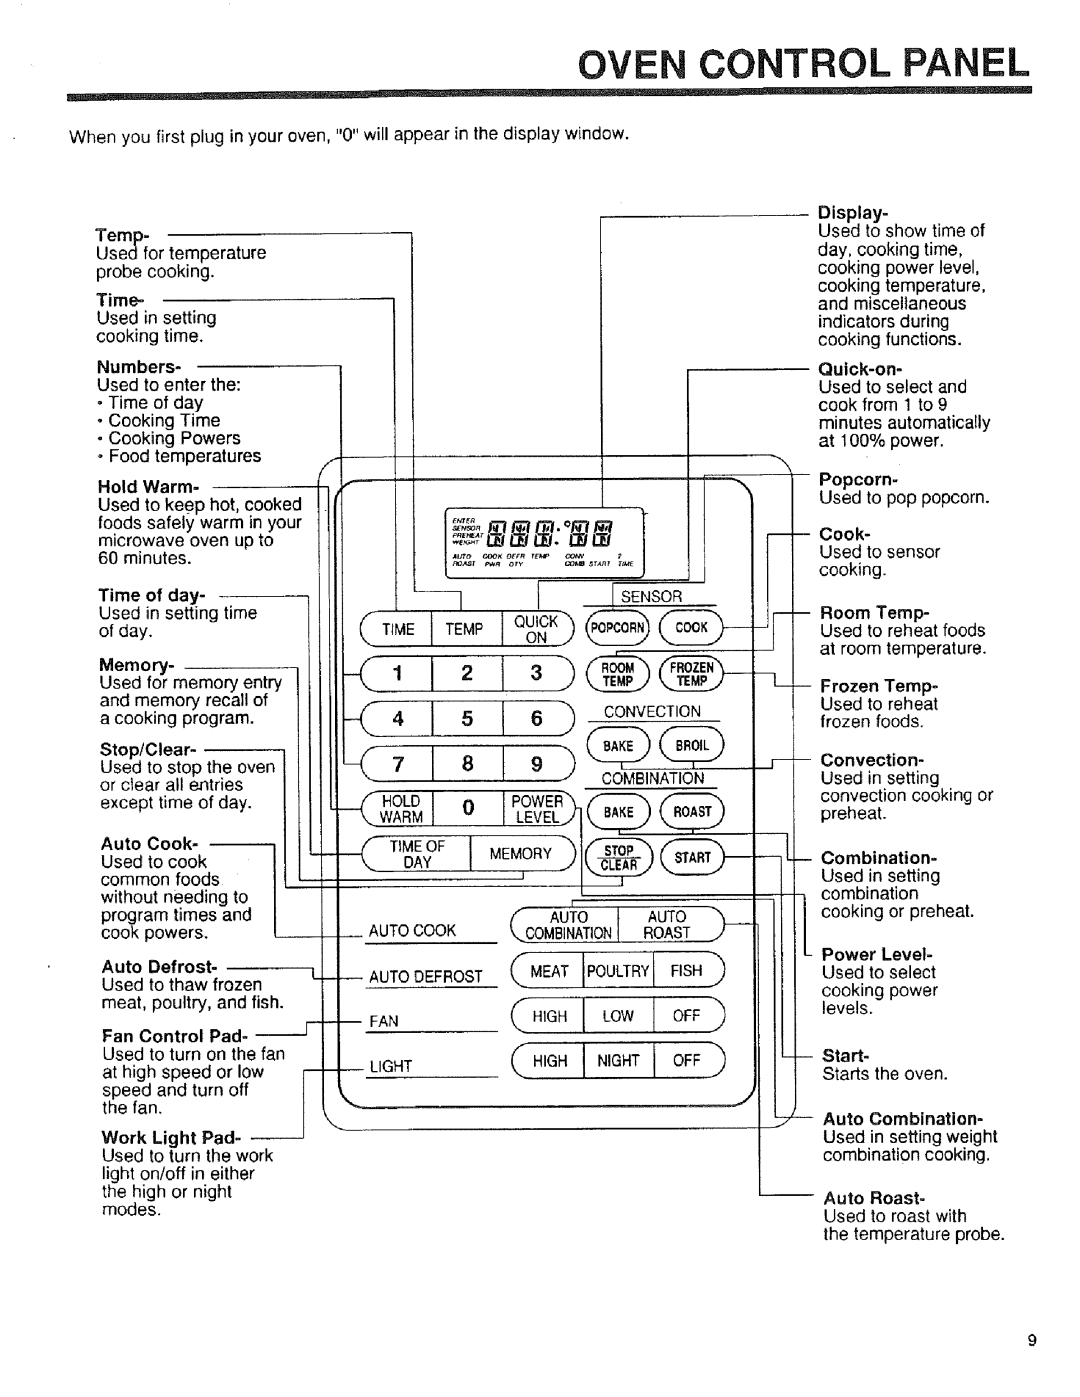 Sears 89952 manual Oven Control Panel, Memory, Auto Defrost, Work Light Pad, Quick-on, Popcorn, Power Level= Used to select 